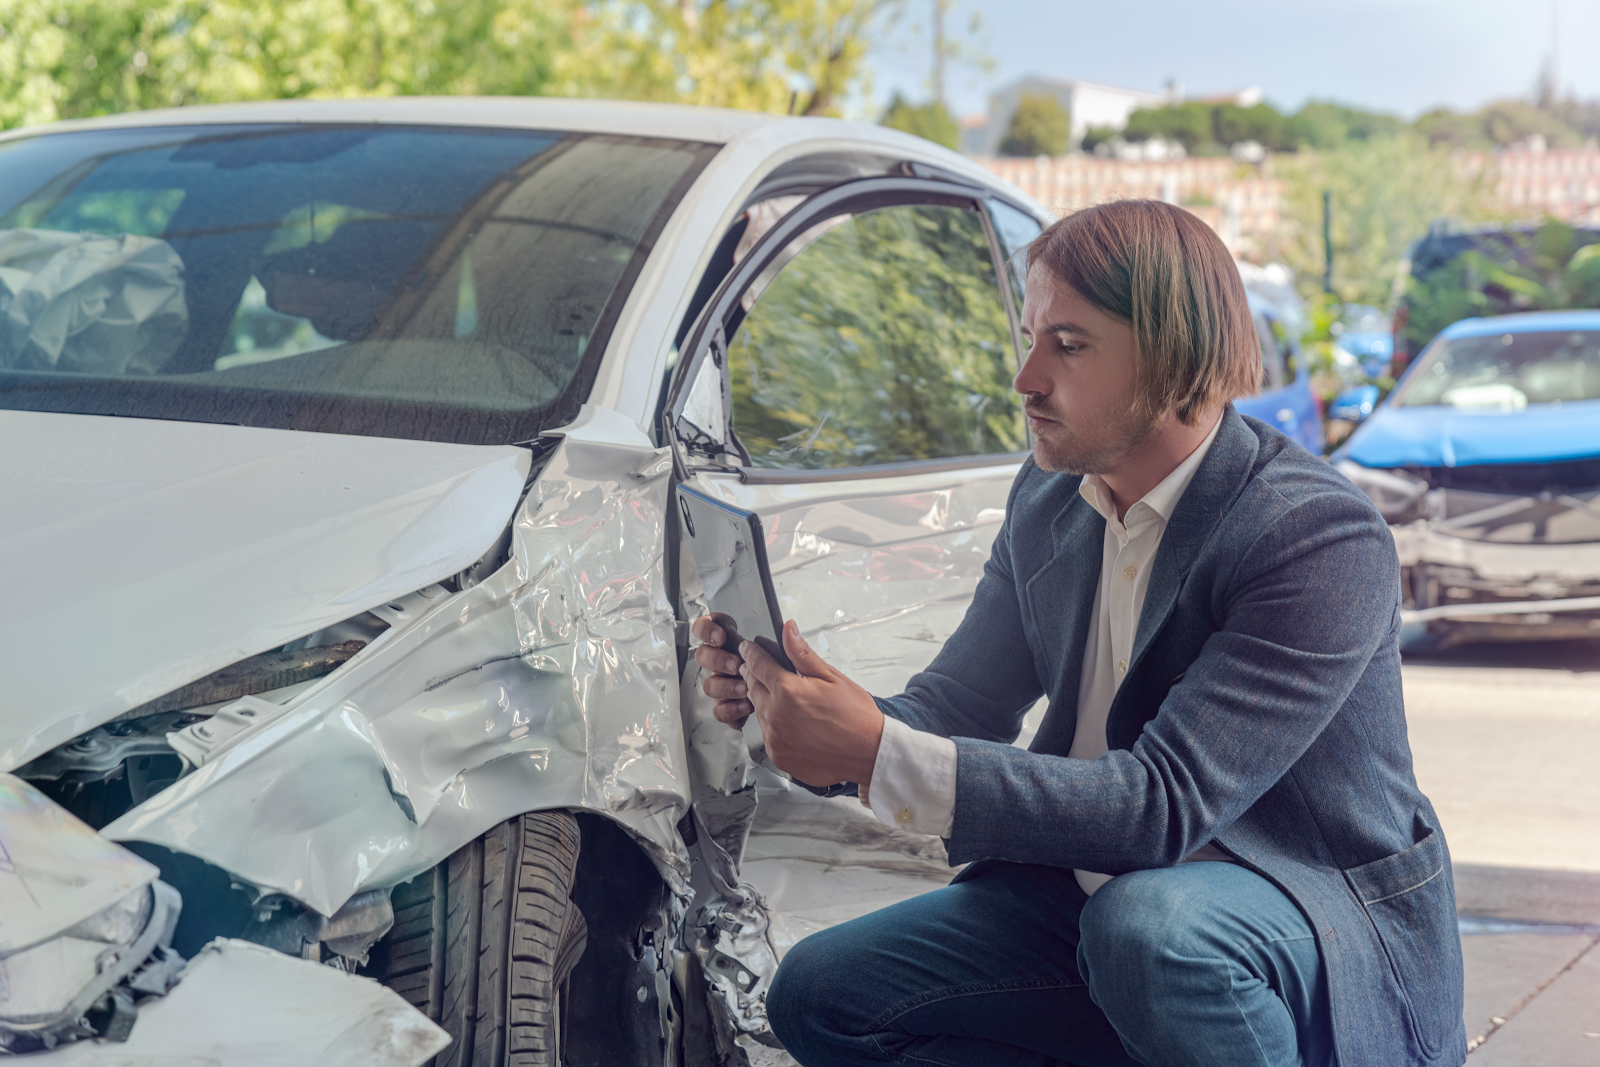 car accident claims adjuster taking a picture of the damage